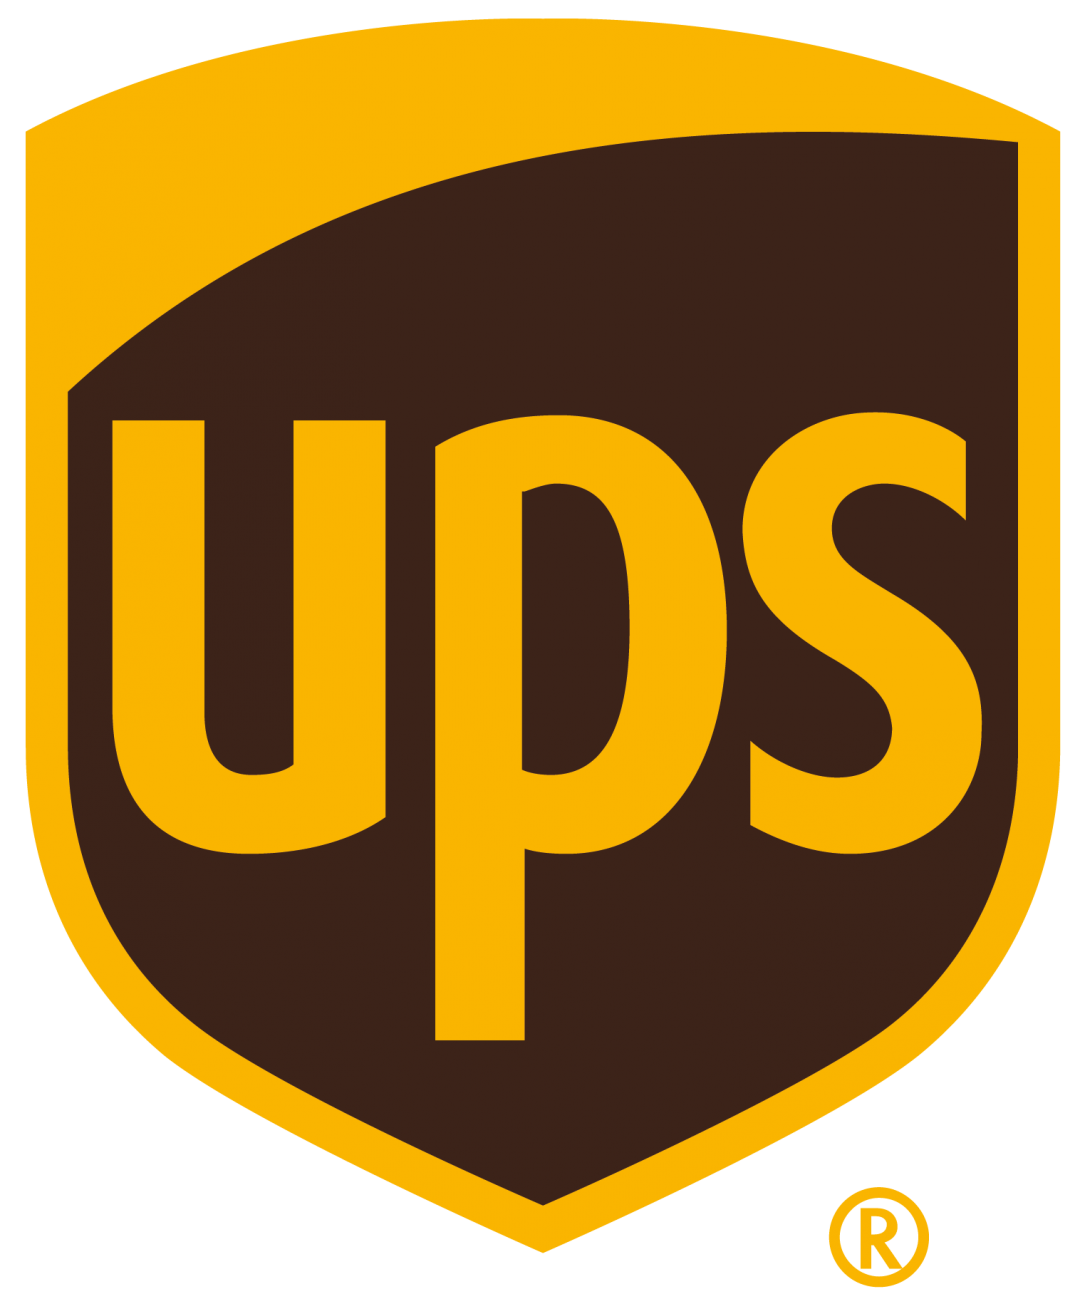 Trillium Brewing Company Launches UPS Delivery Throughout Massachusetts